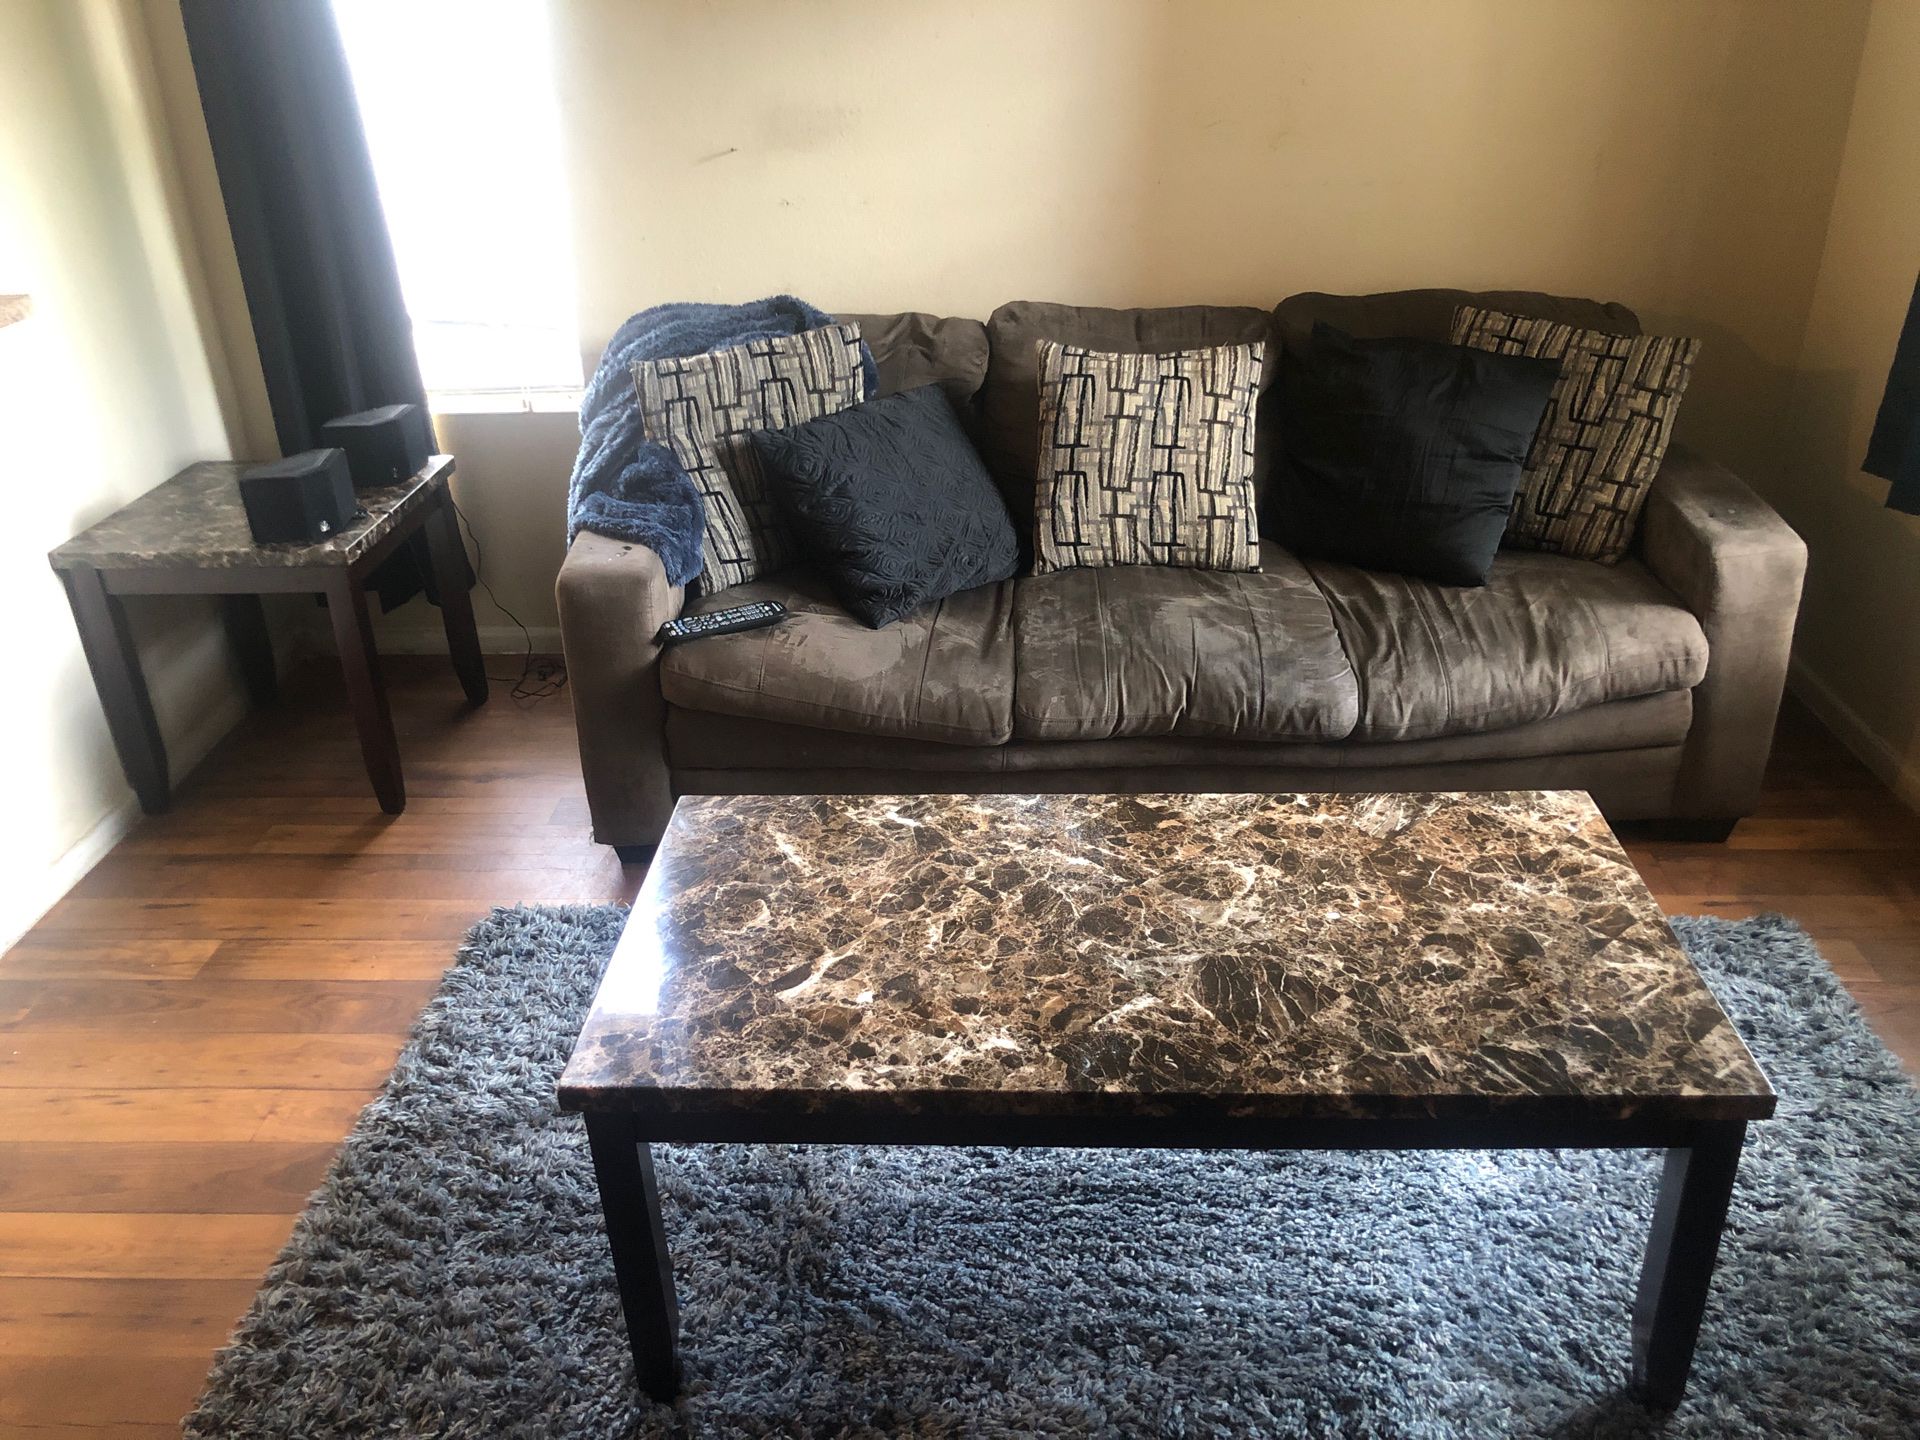 COUCH , COFFEE TABLE, END Table for low offer must go! 150 or Best offer